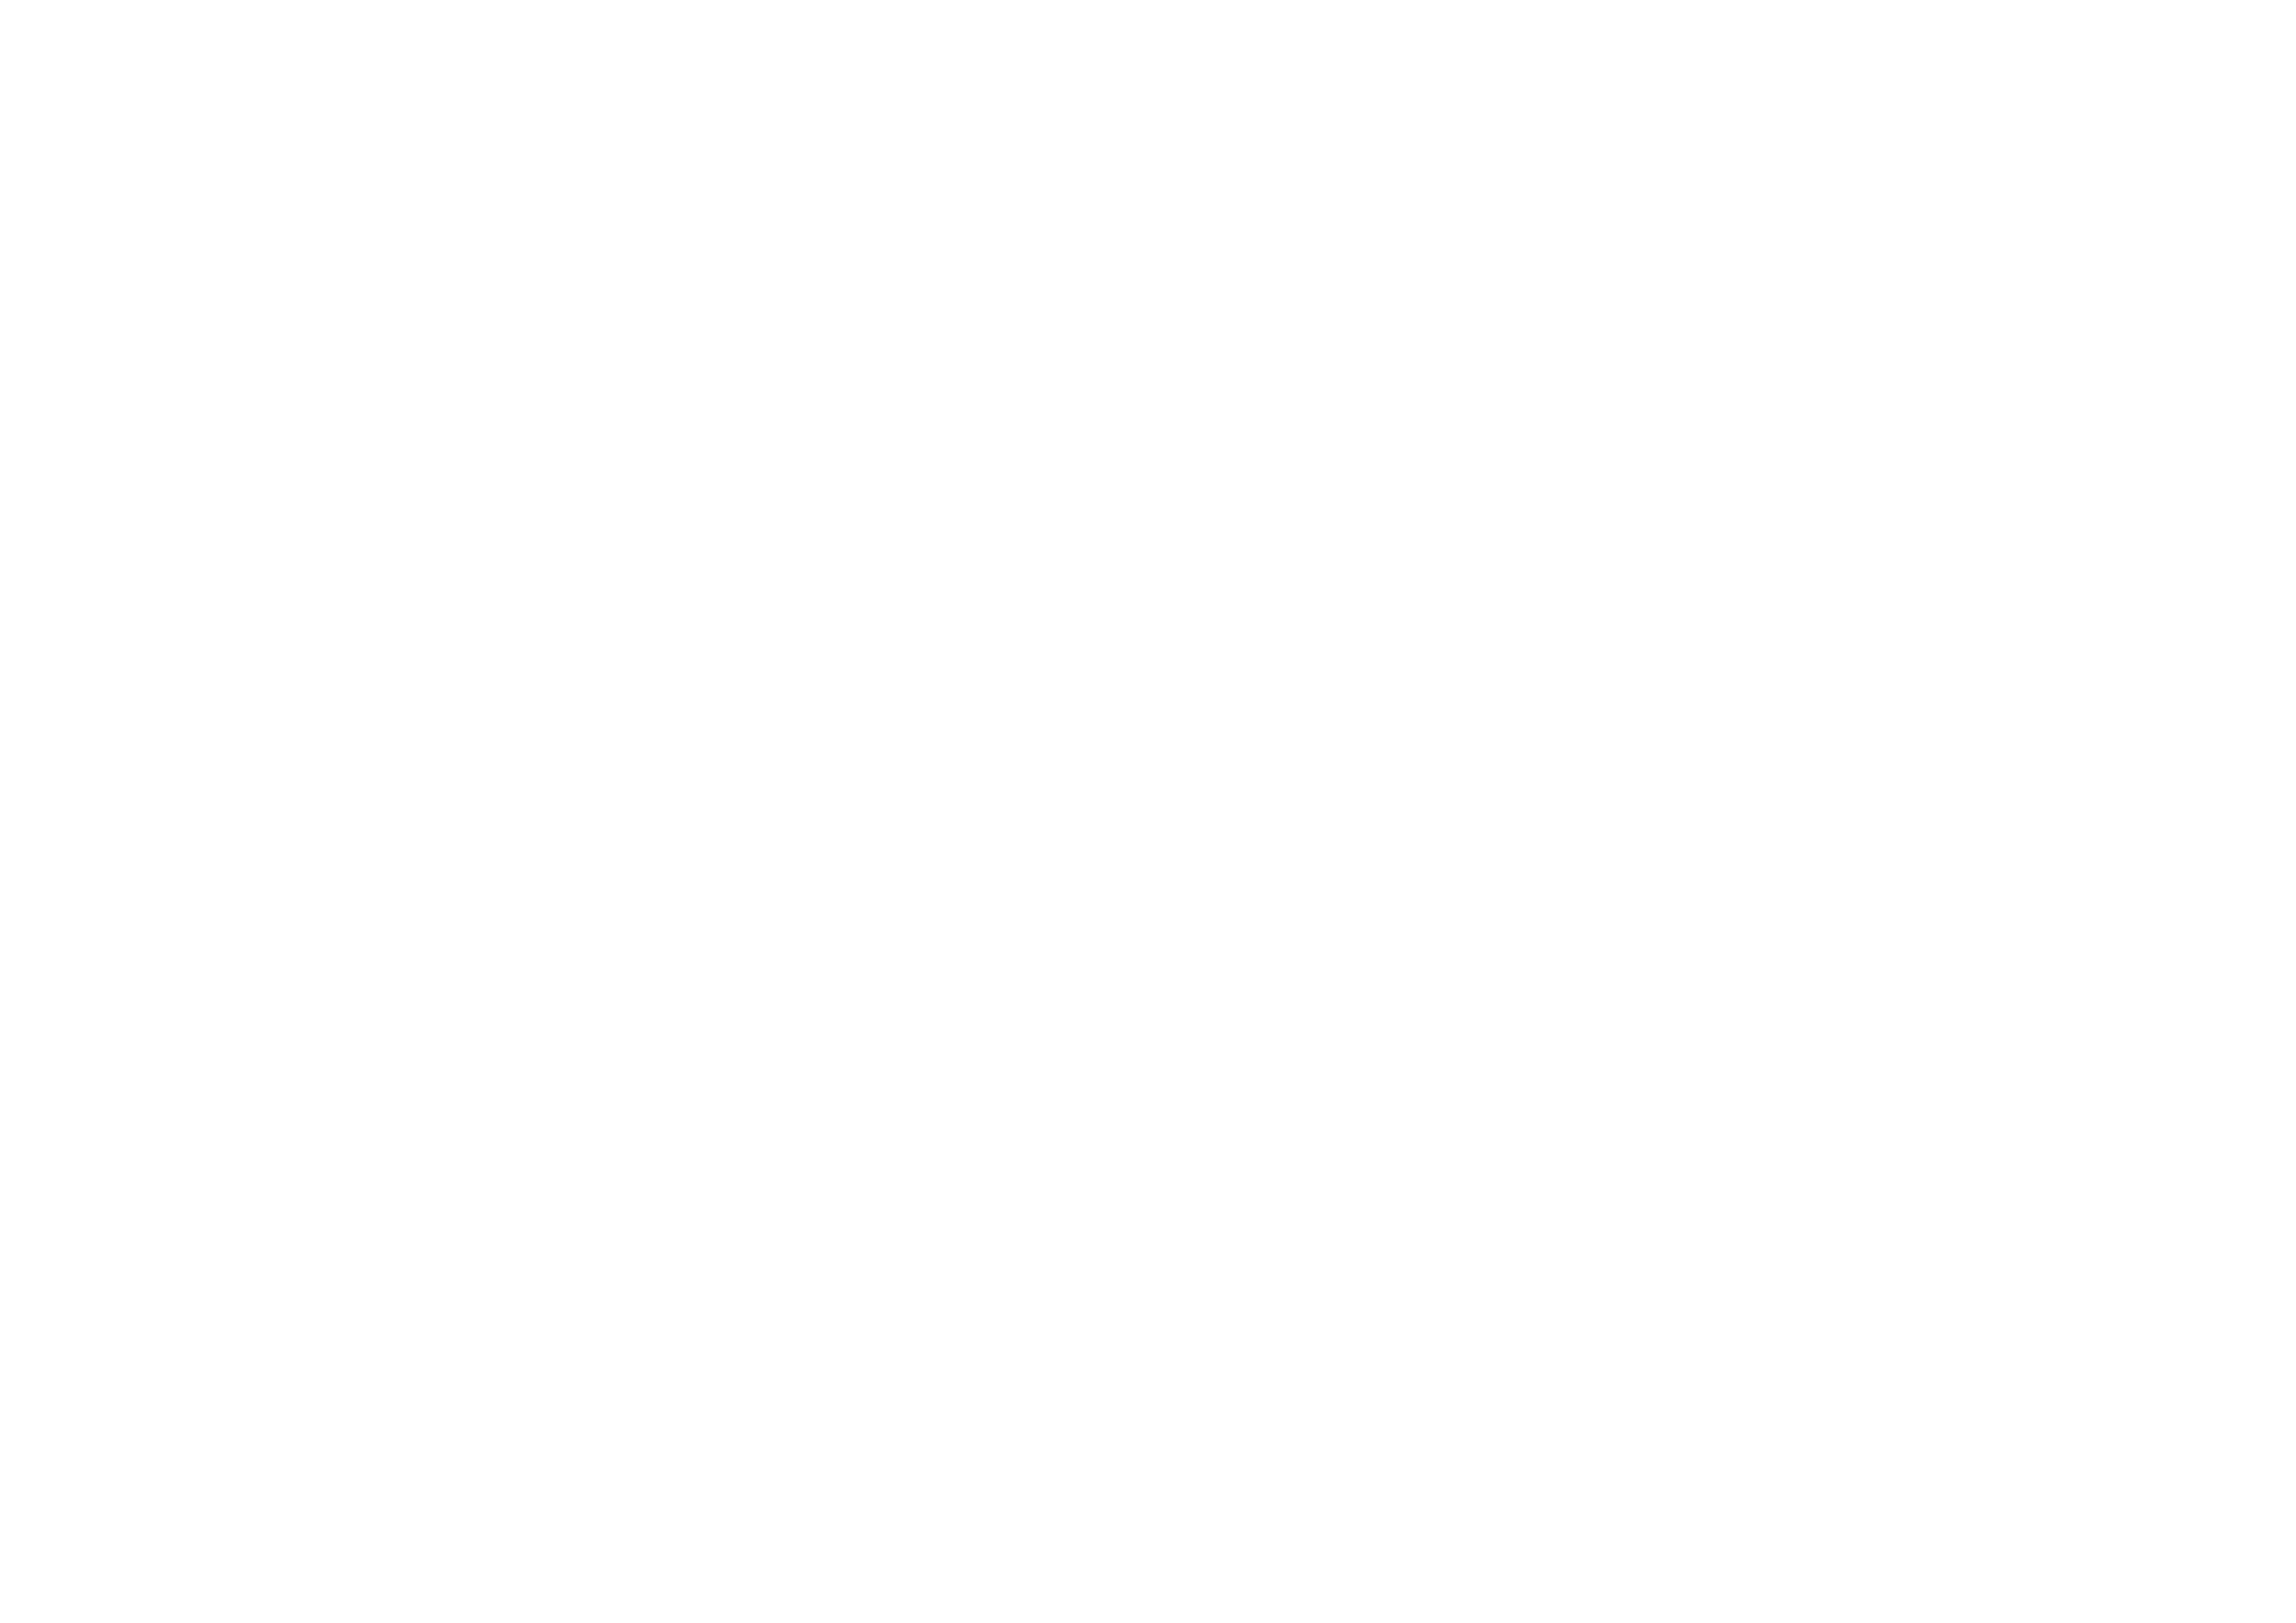 Black Diamond Tattoo - Arriving for your first tattoo